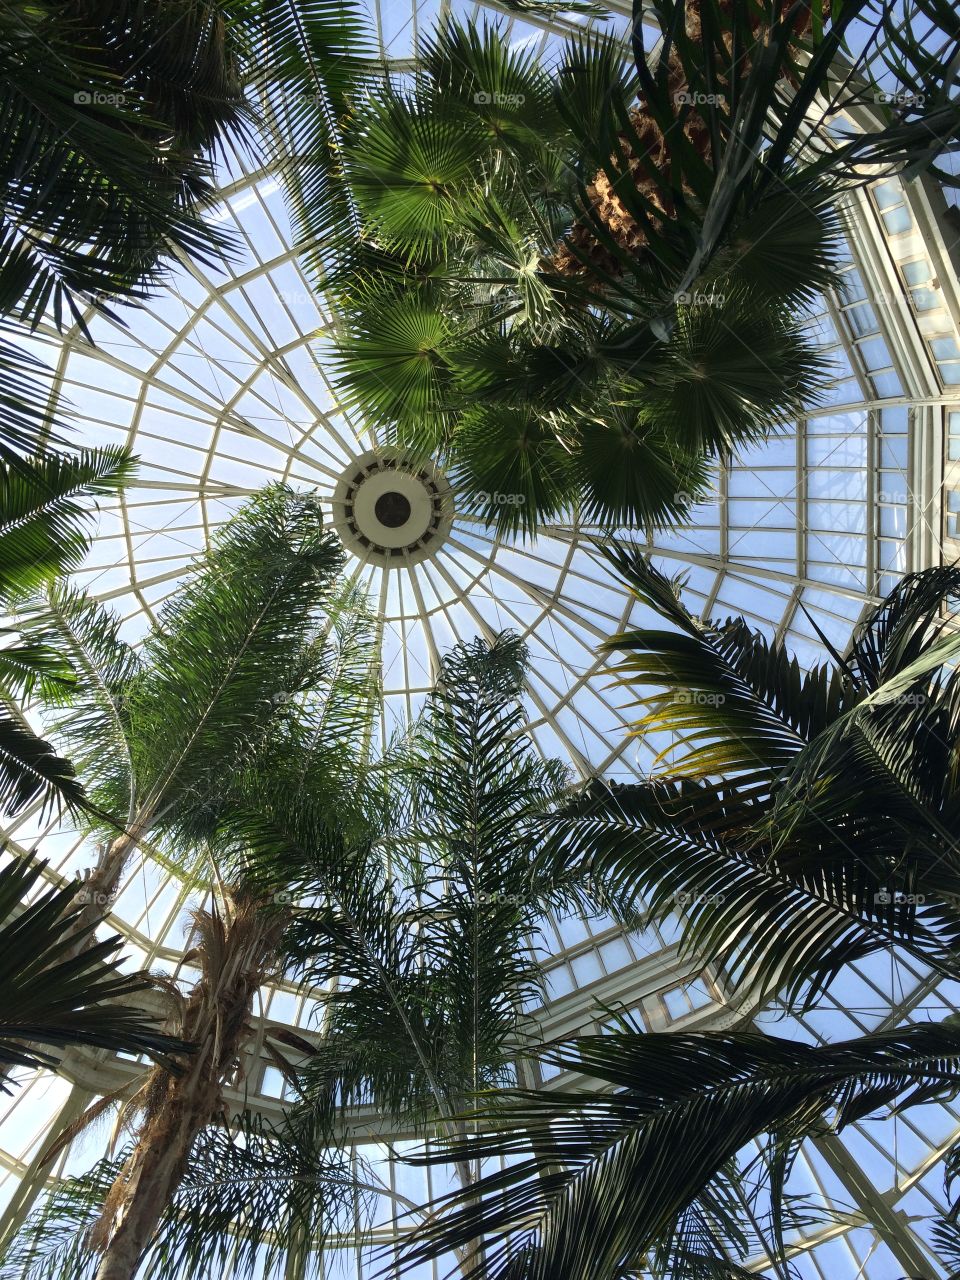 Como Conservatory. My daughter Sam took this pic